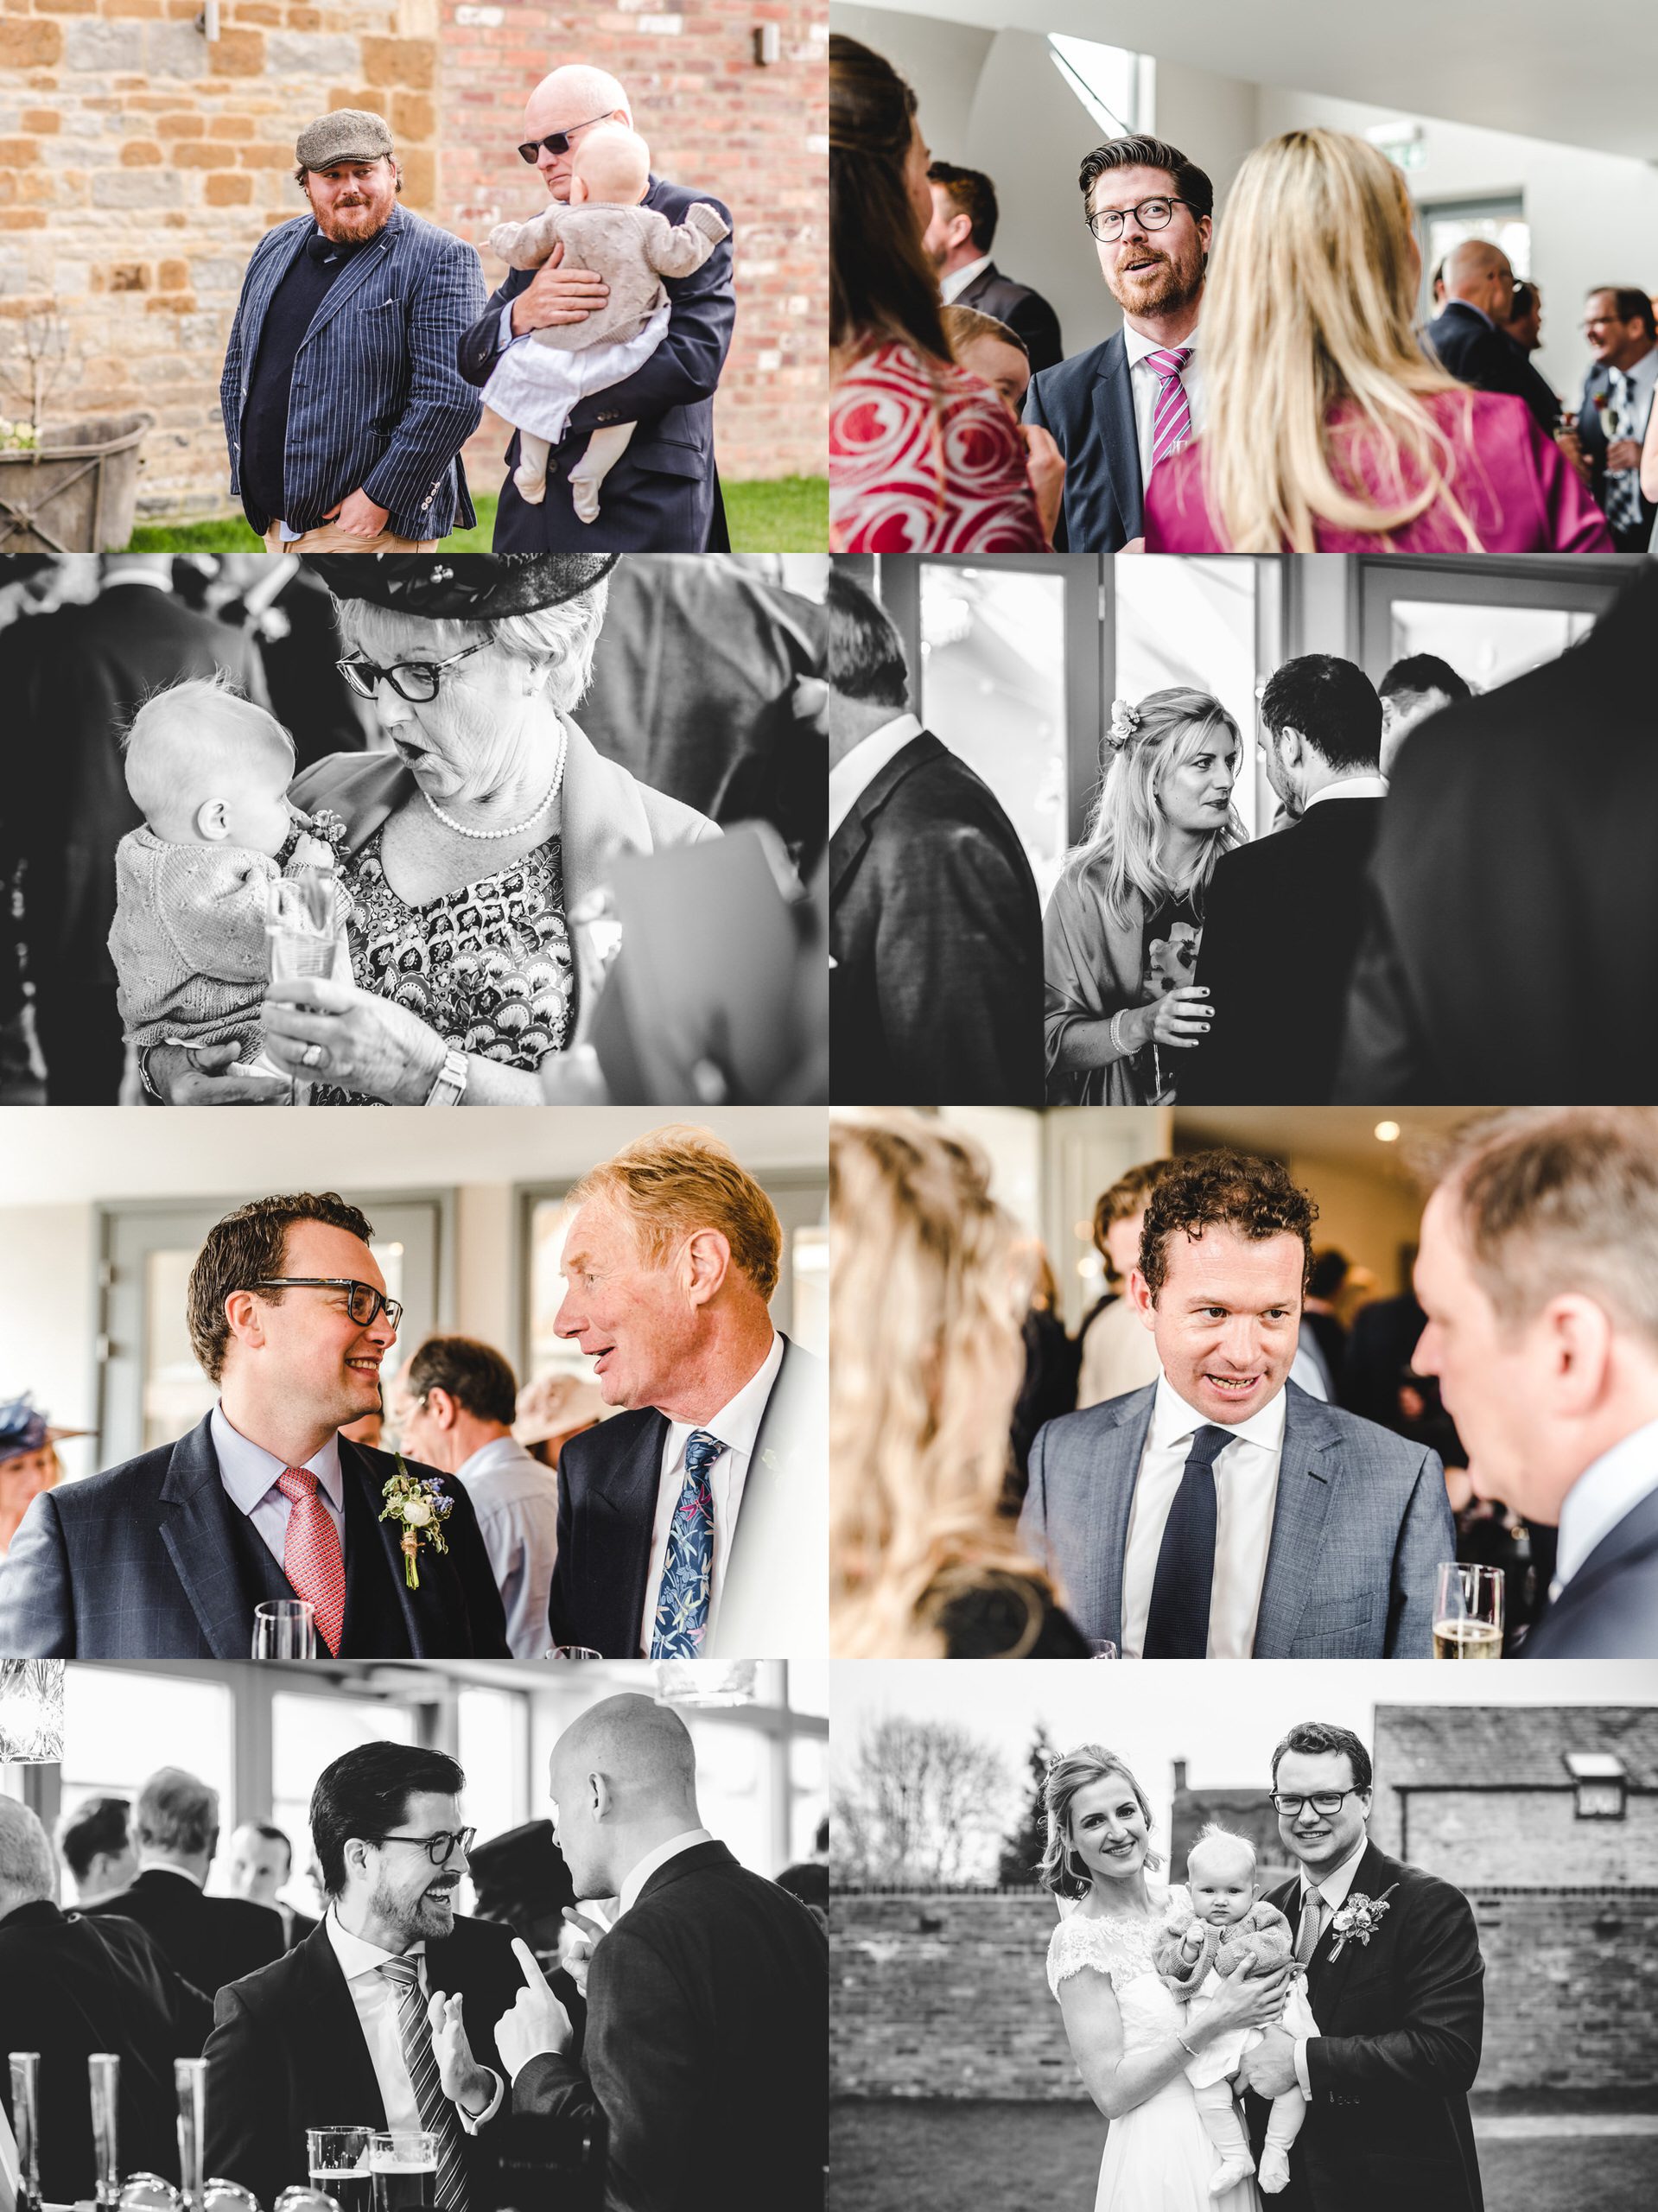 Candid pictures of wedding guests at Blackwell Grange